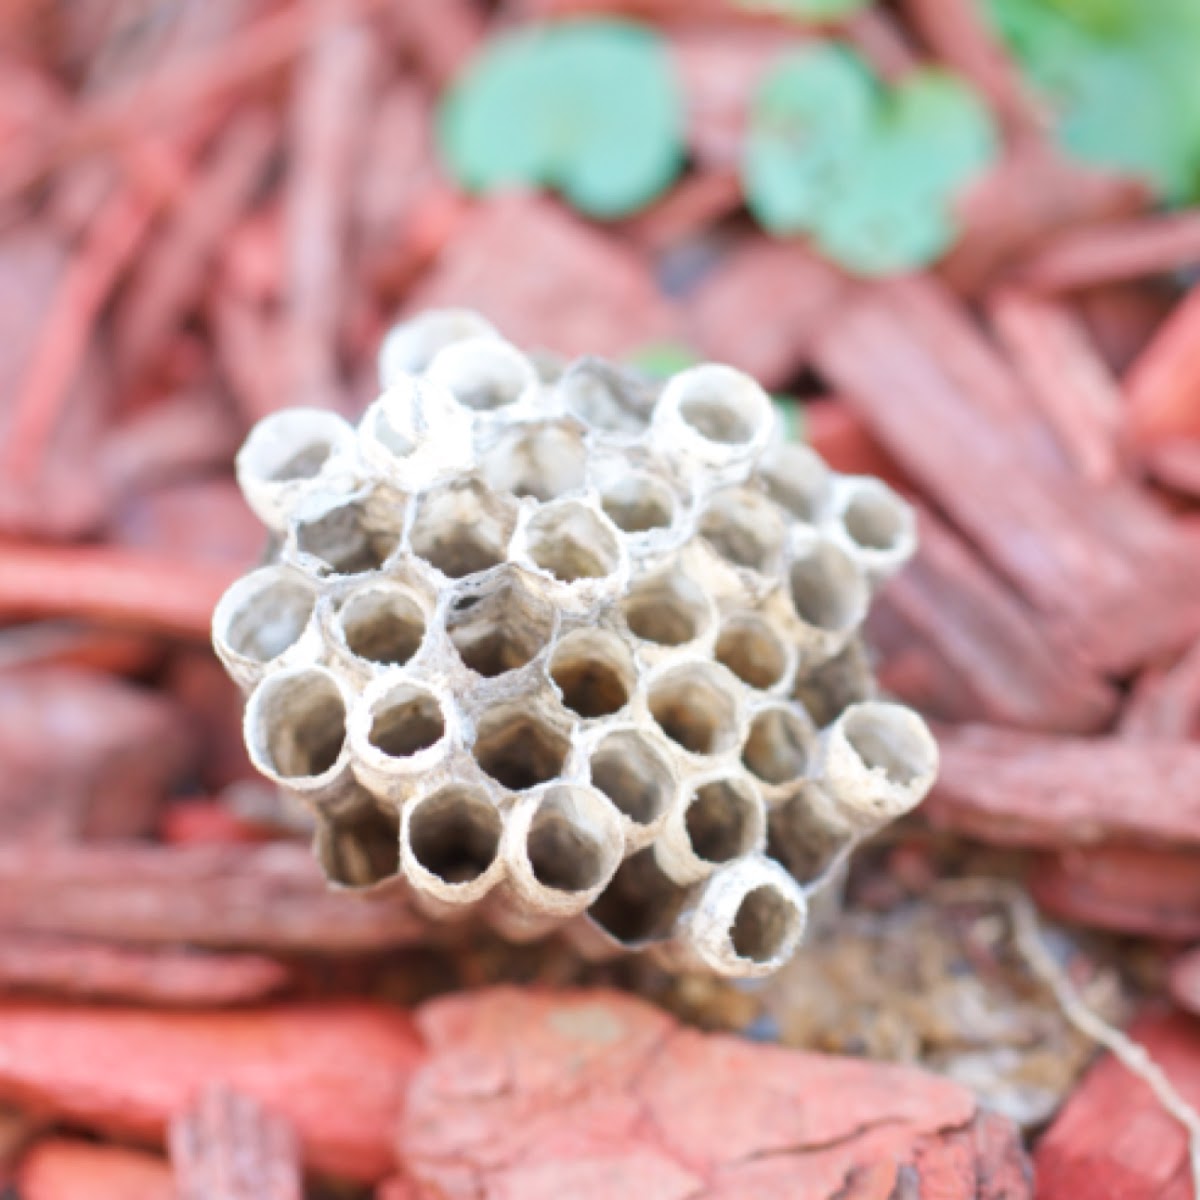 Paper wasp hive